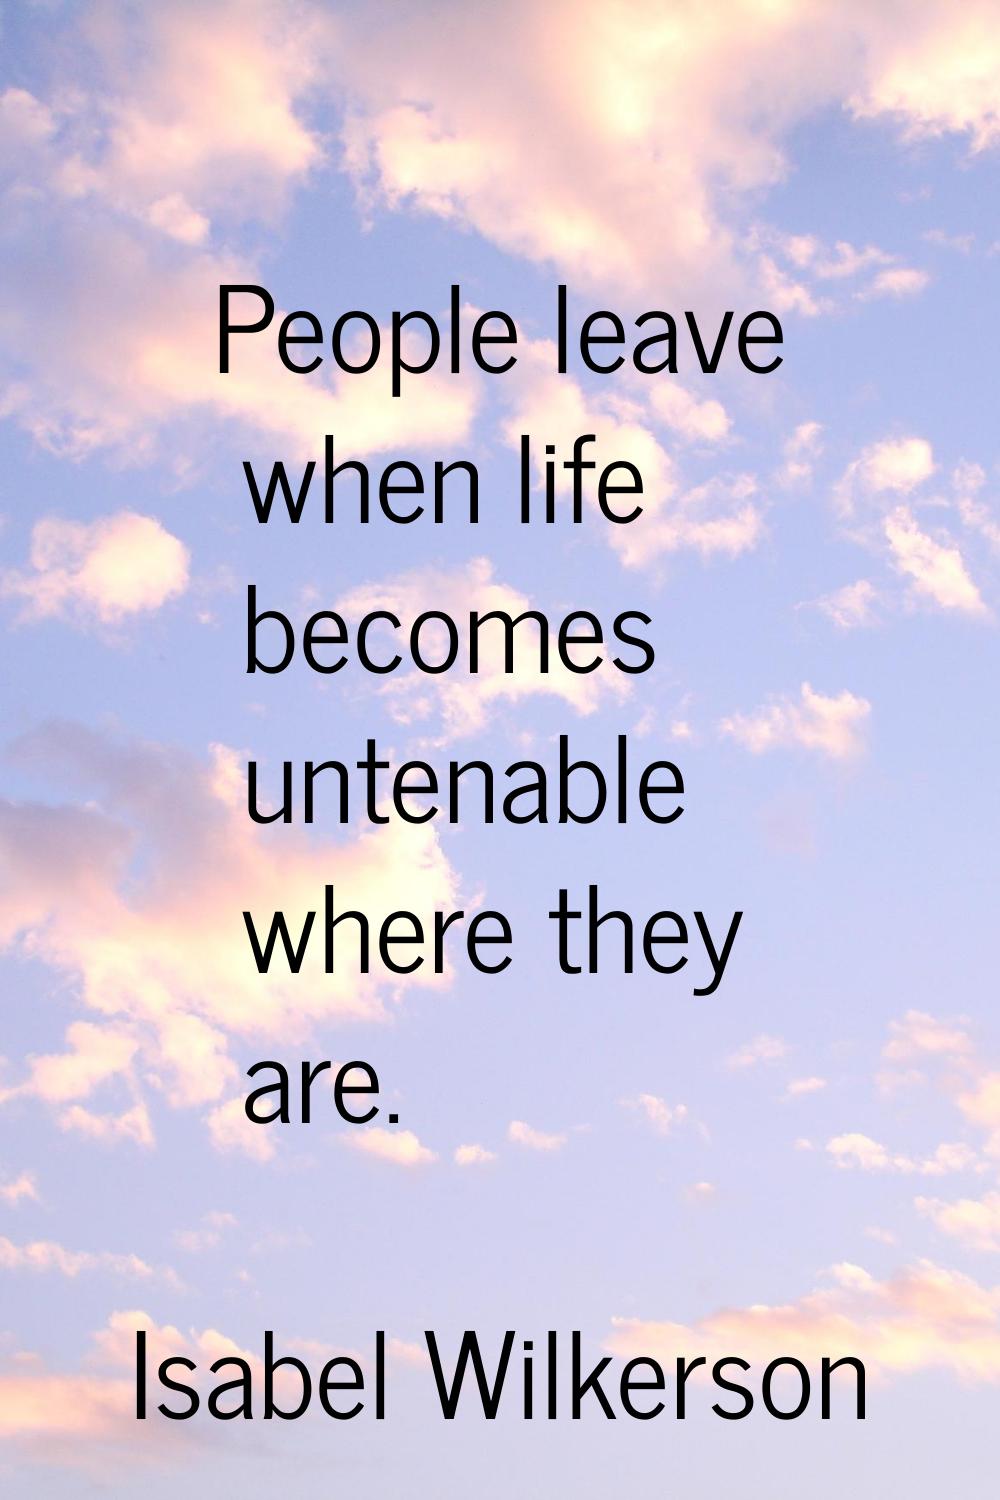 People leave when life becomes untenable where they are.